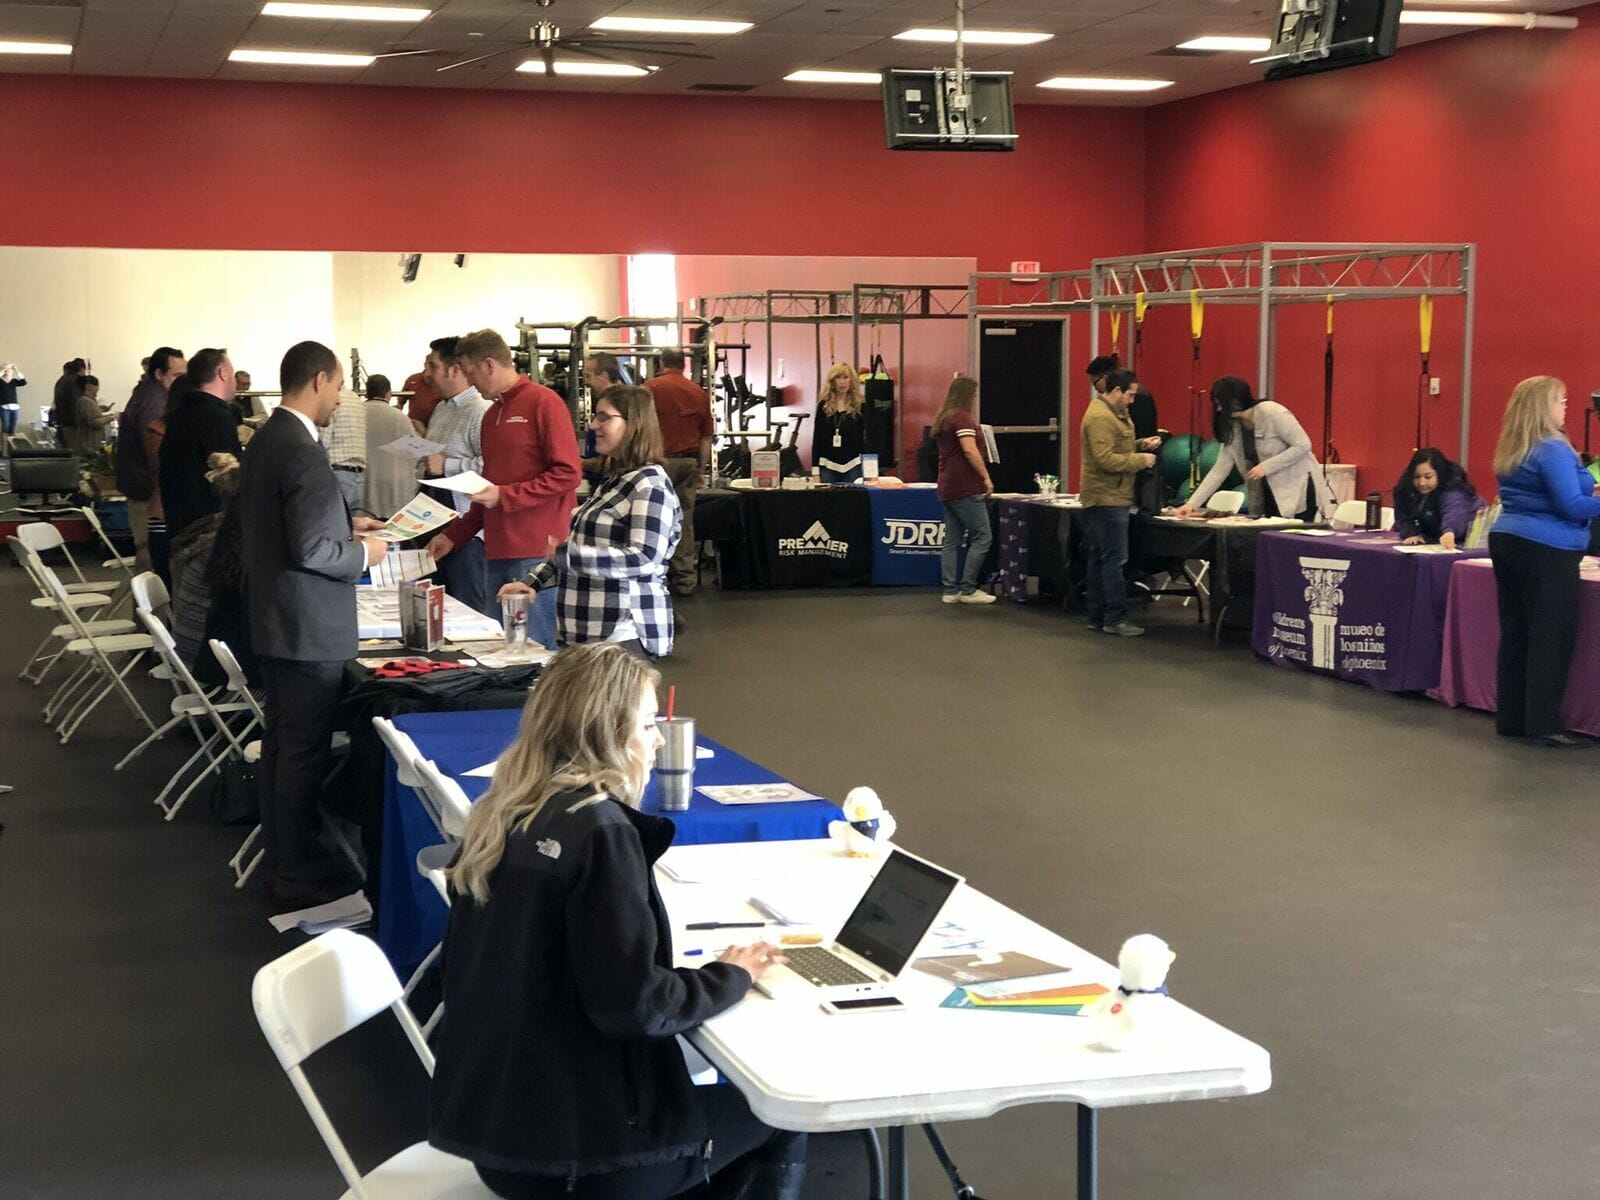 Caliente Construction’s 8th Annual Health Fair Offers Advice on Lifestyle, Safety and Financial Health